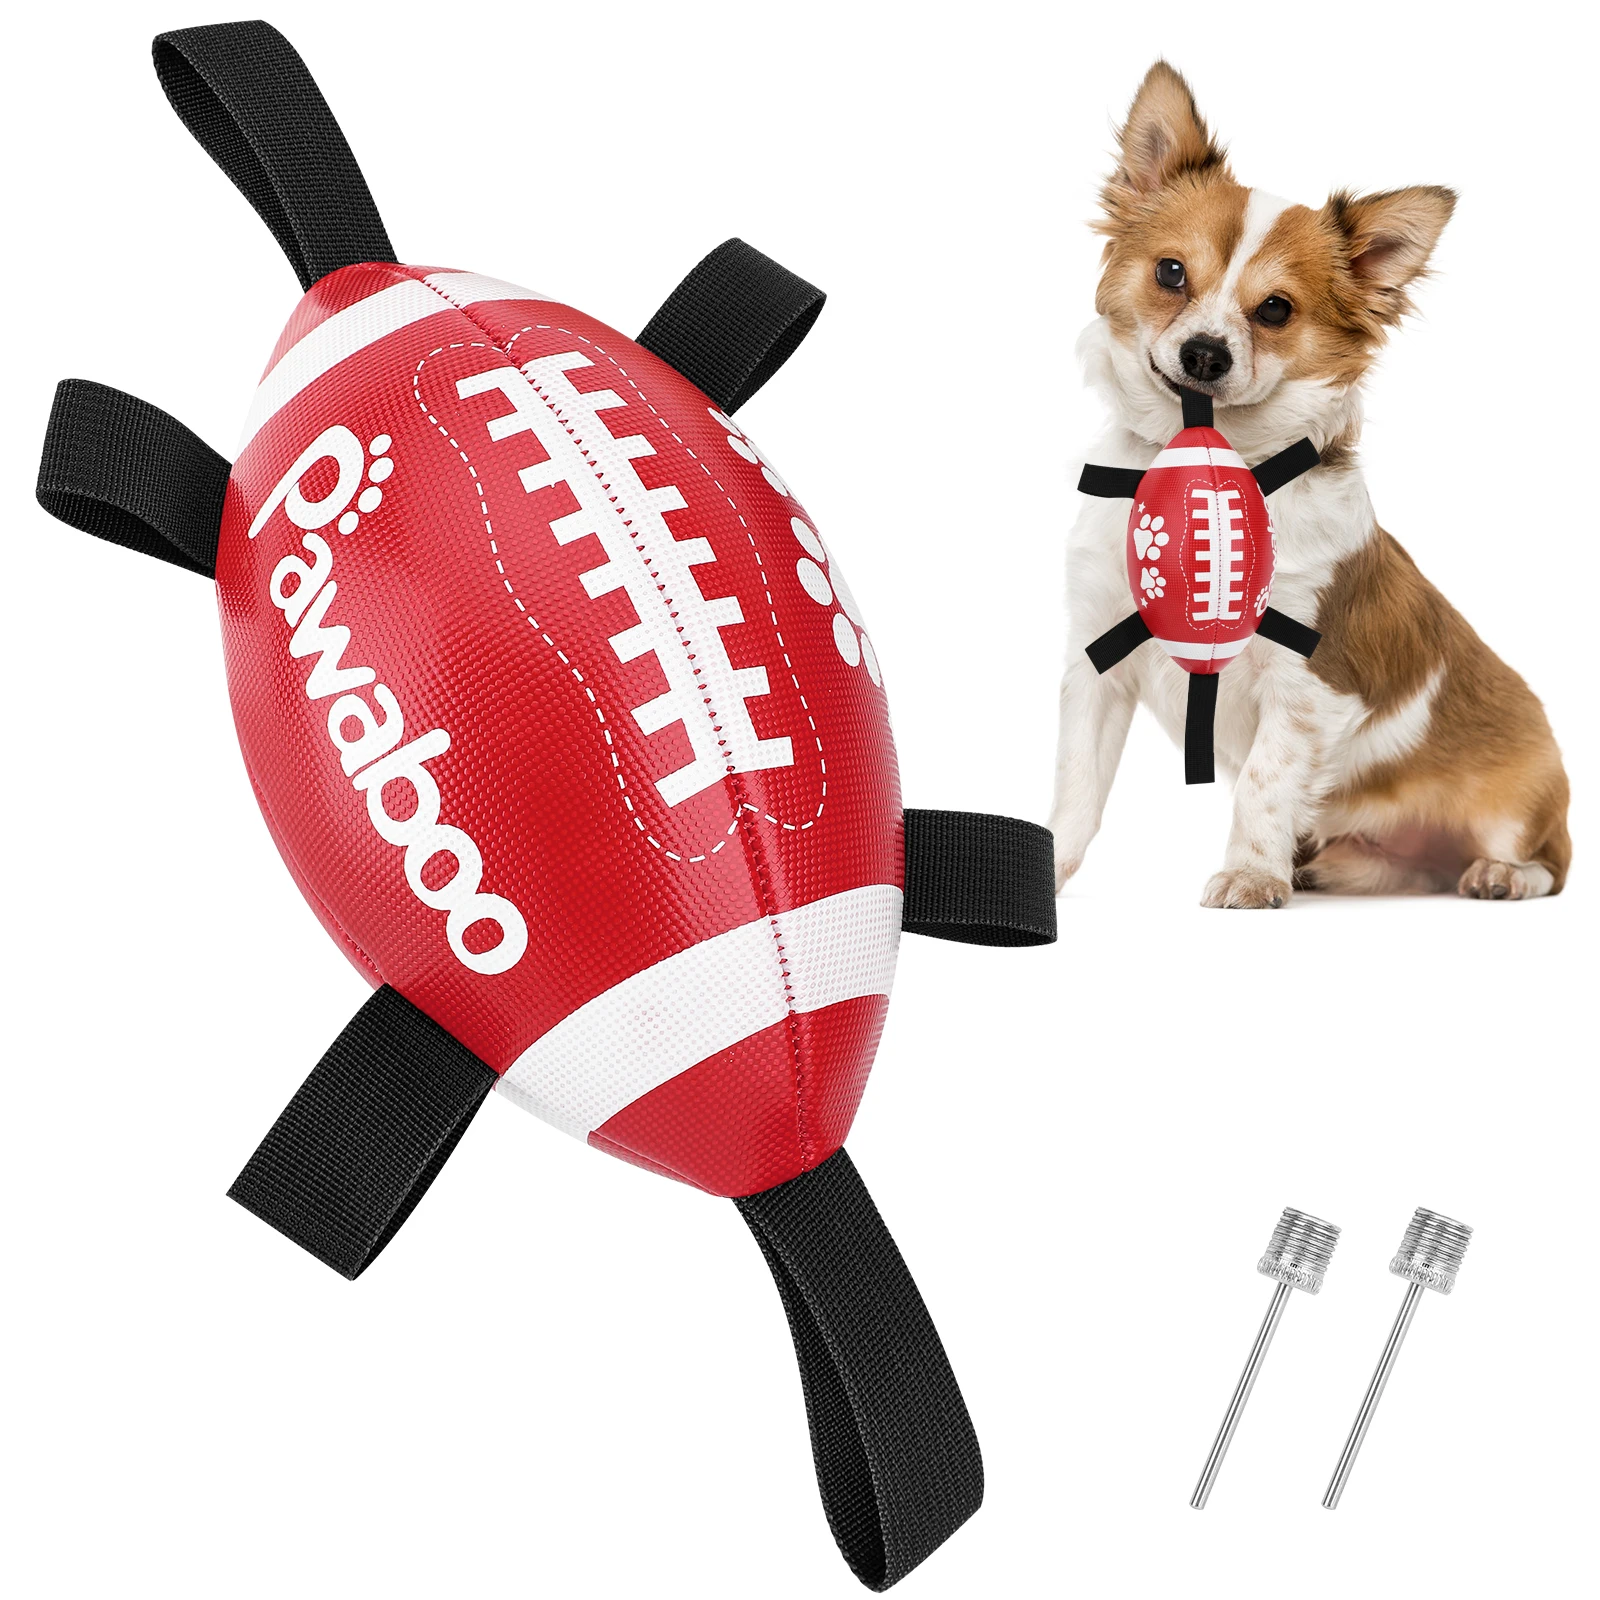 

Pawaboo Pet Football Toys with Easy Grab Tabs, Interactive wobble dog Soccer Ball toys Fit water Playing for Small, Medium Dogs, Brown white army green/red white black